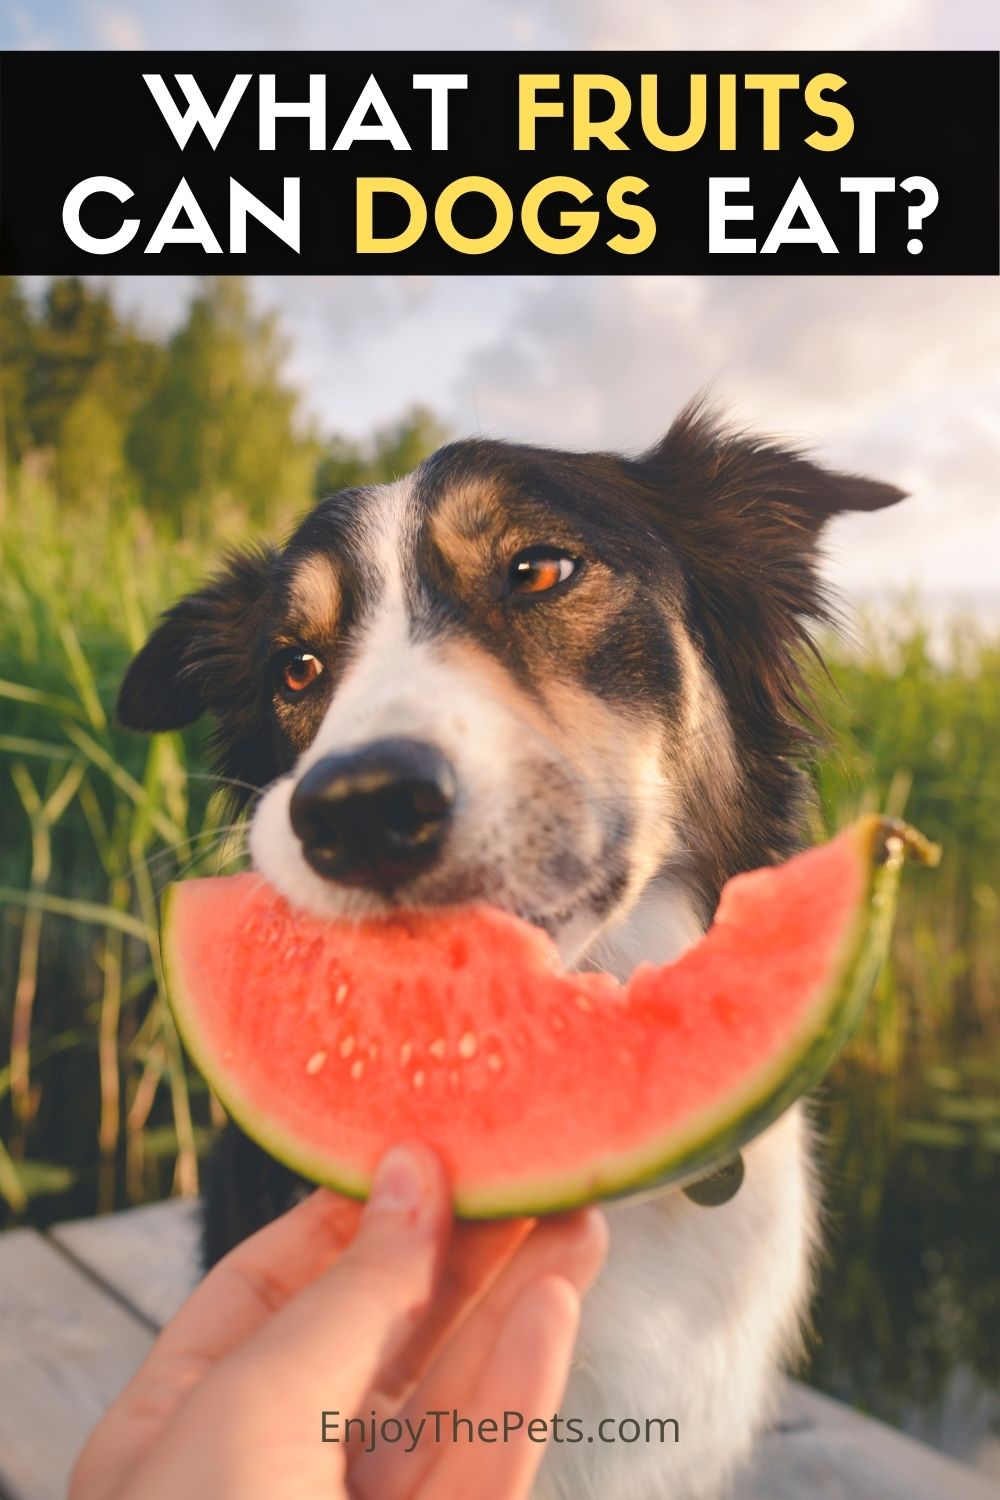 WHAT-FRUITS-CAN-DOGS-EAT